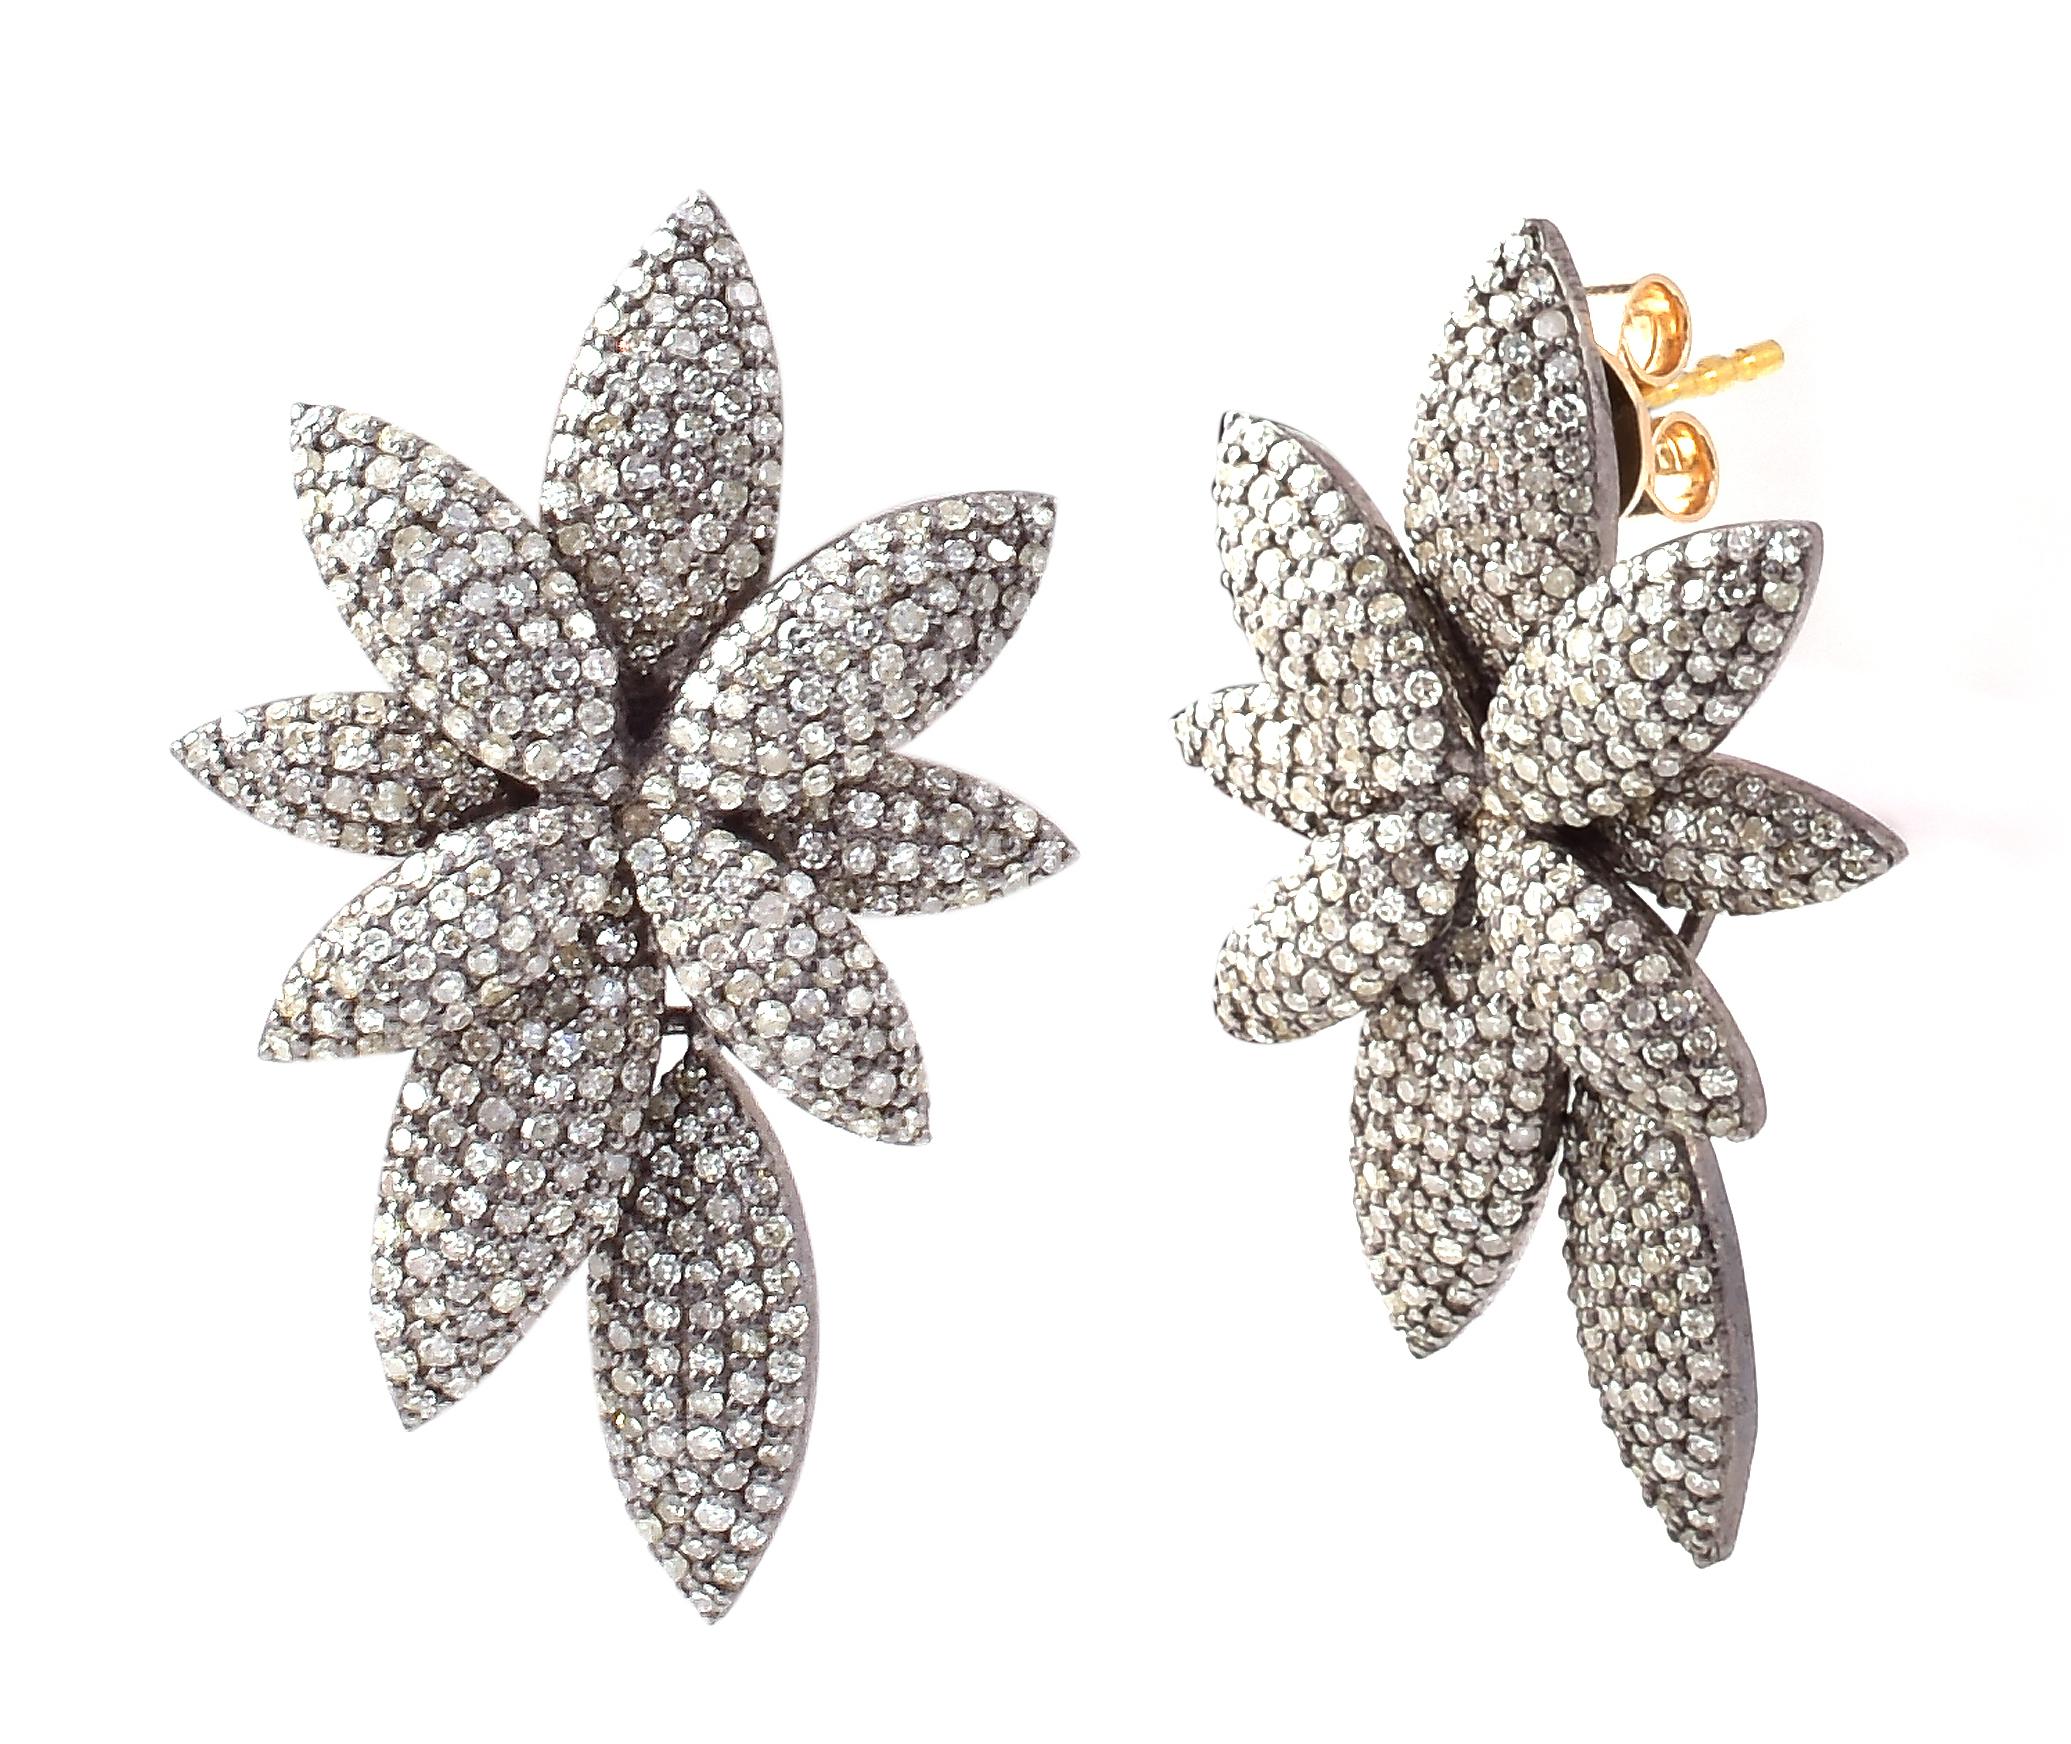 3.01 Carat Diamond Modulation Stud Earrings in Contemporary Style

This Victorian art-deco style diamond pave set stud earring is exquisite. The combination of uneven mix size marquise shaped is formed by several rows of pave set round diamonds. The